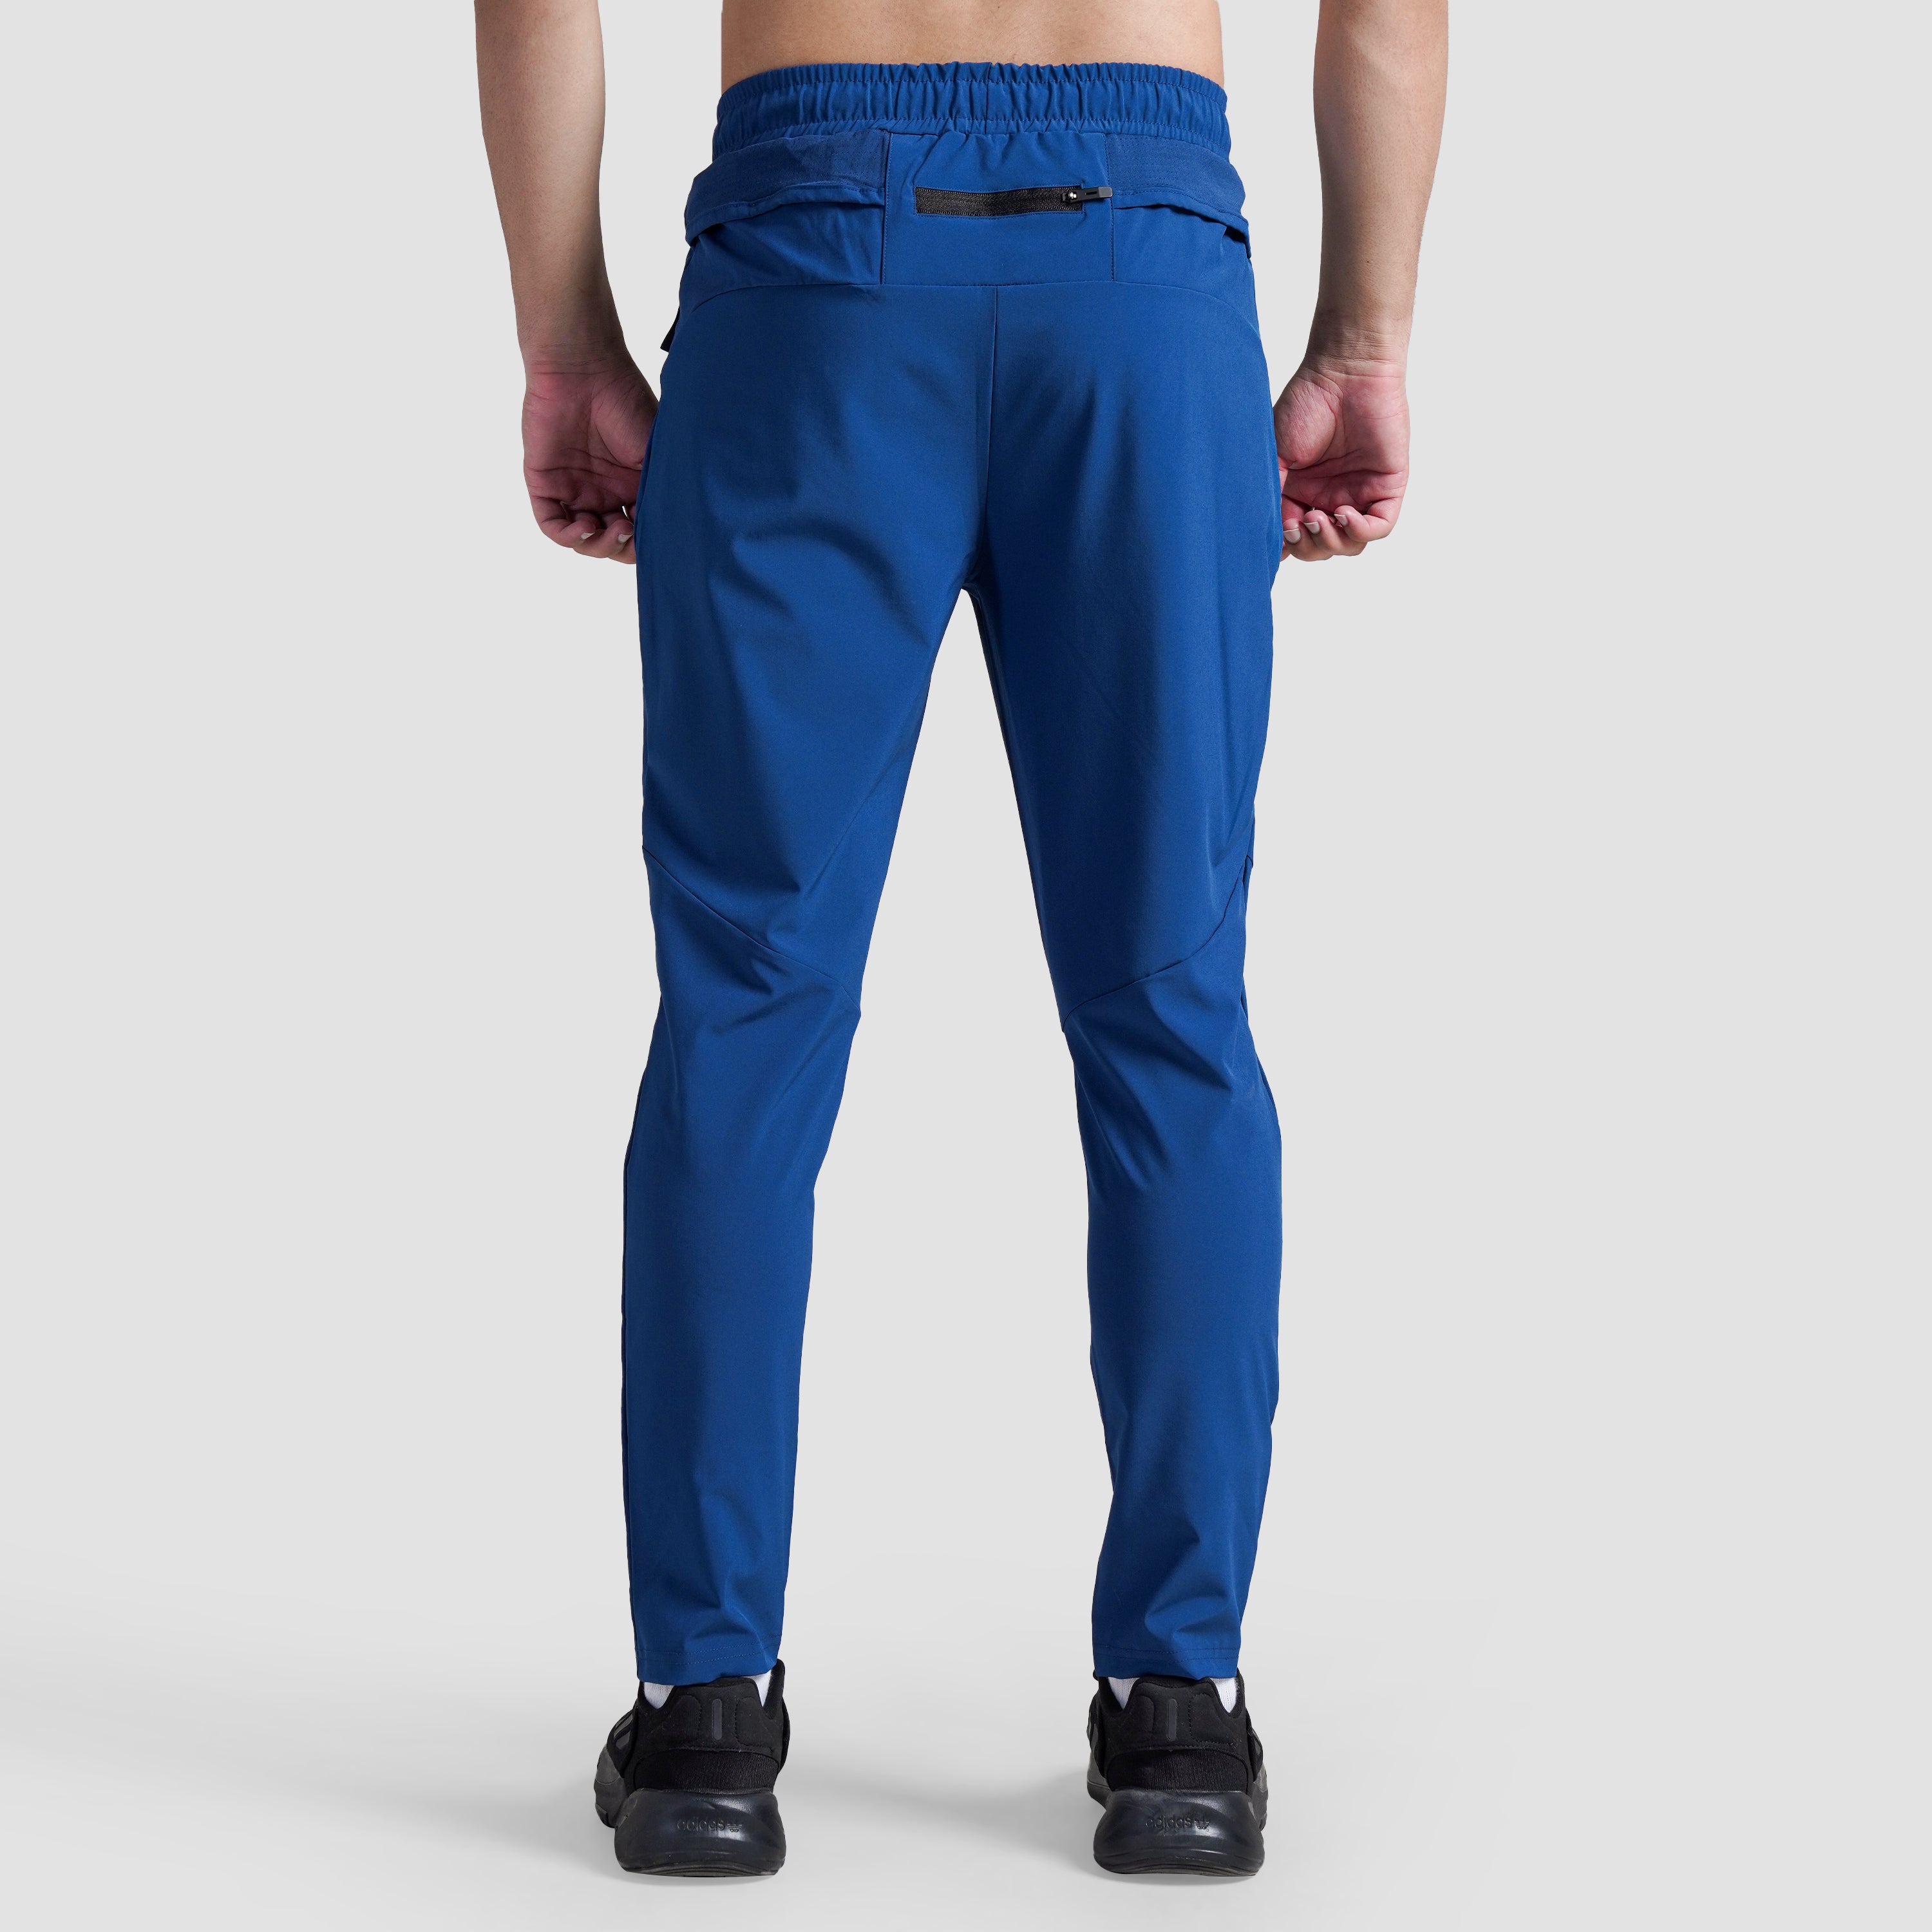 Agility Track Trousers (Teal)